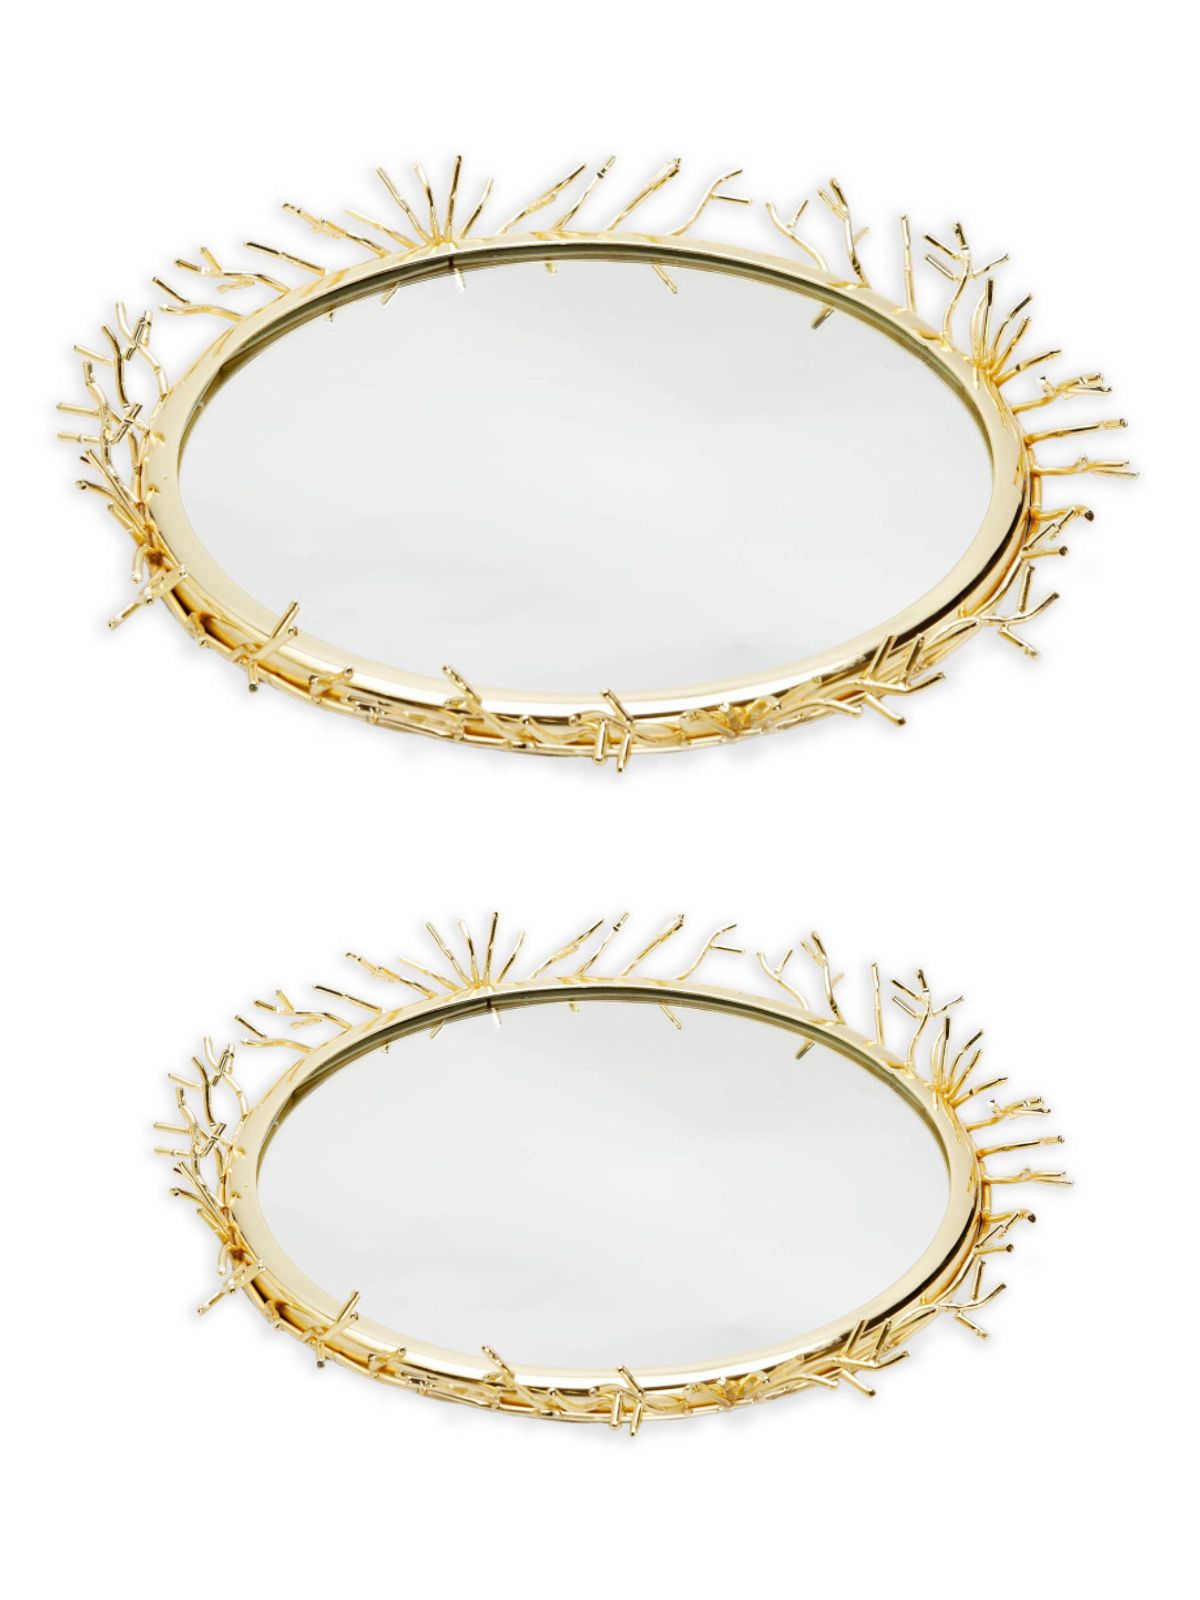 Round Decorative Mirror Tray with Stainless Steel Gold Twigs Design, available in 2 sizes.